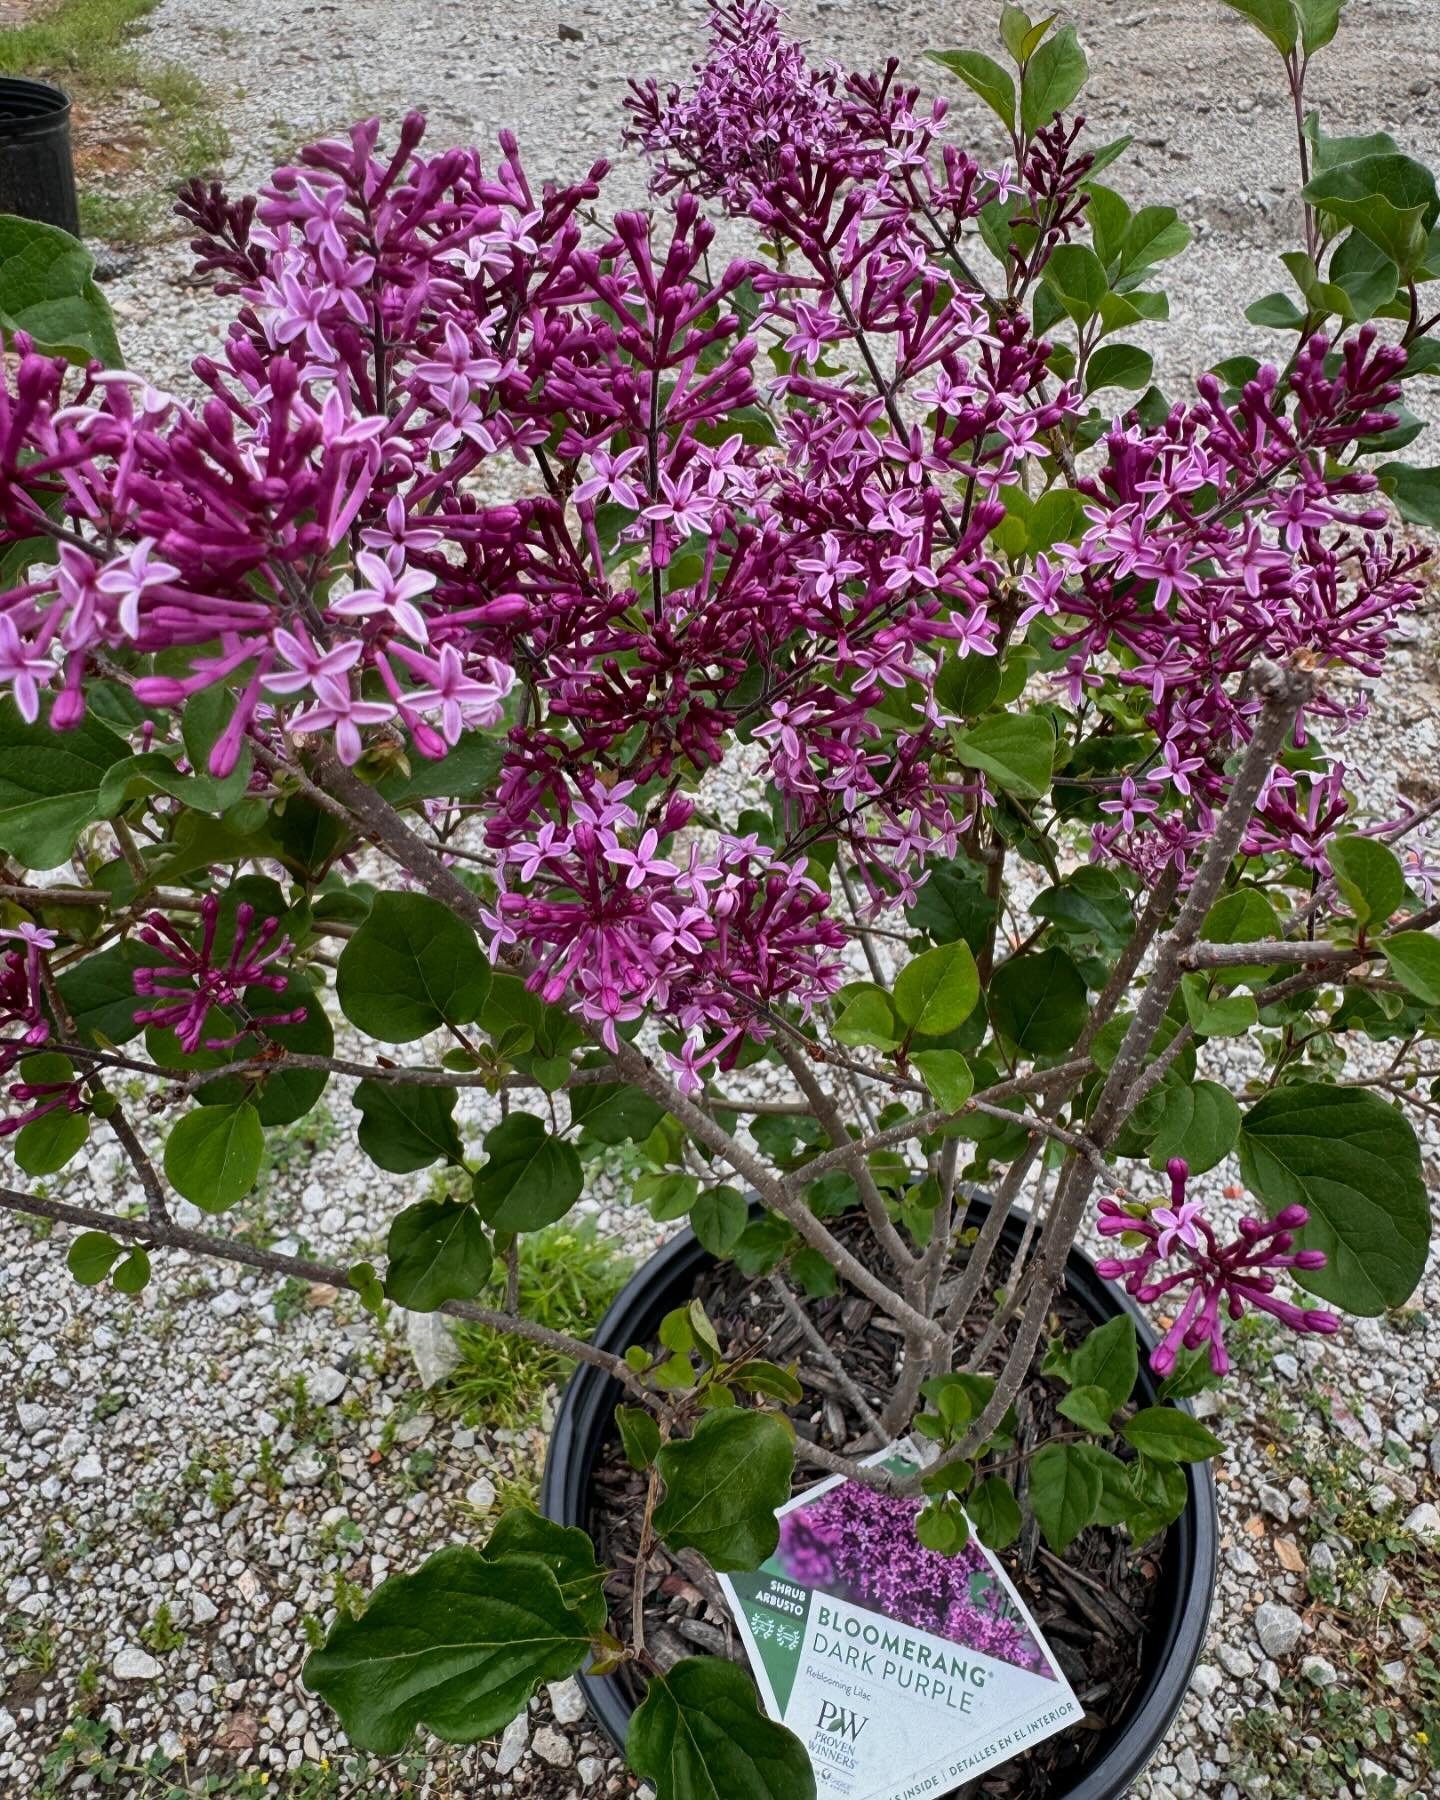 Late last year, we found this rather sad end-of-season lilac at a great price on clearance at a big box store. We kept it indoors through the winter, cared for it and now it&rsquo;s happy blooming! We&rsquo;ll need to pick a suitable spot in the gard